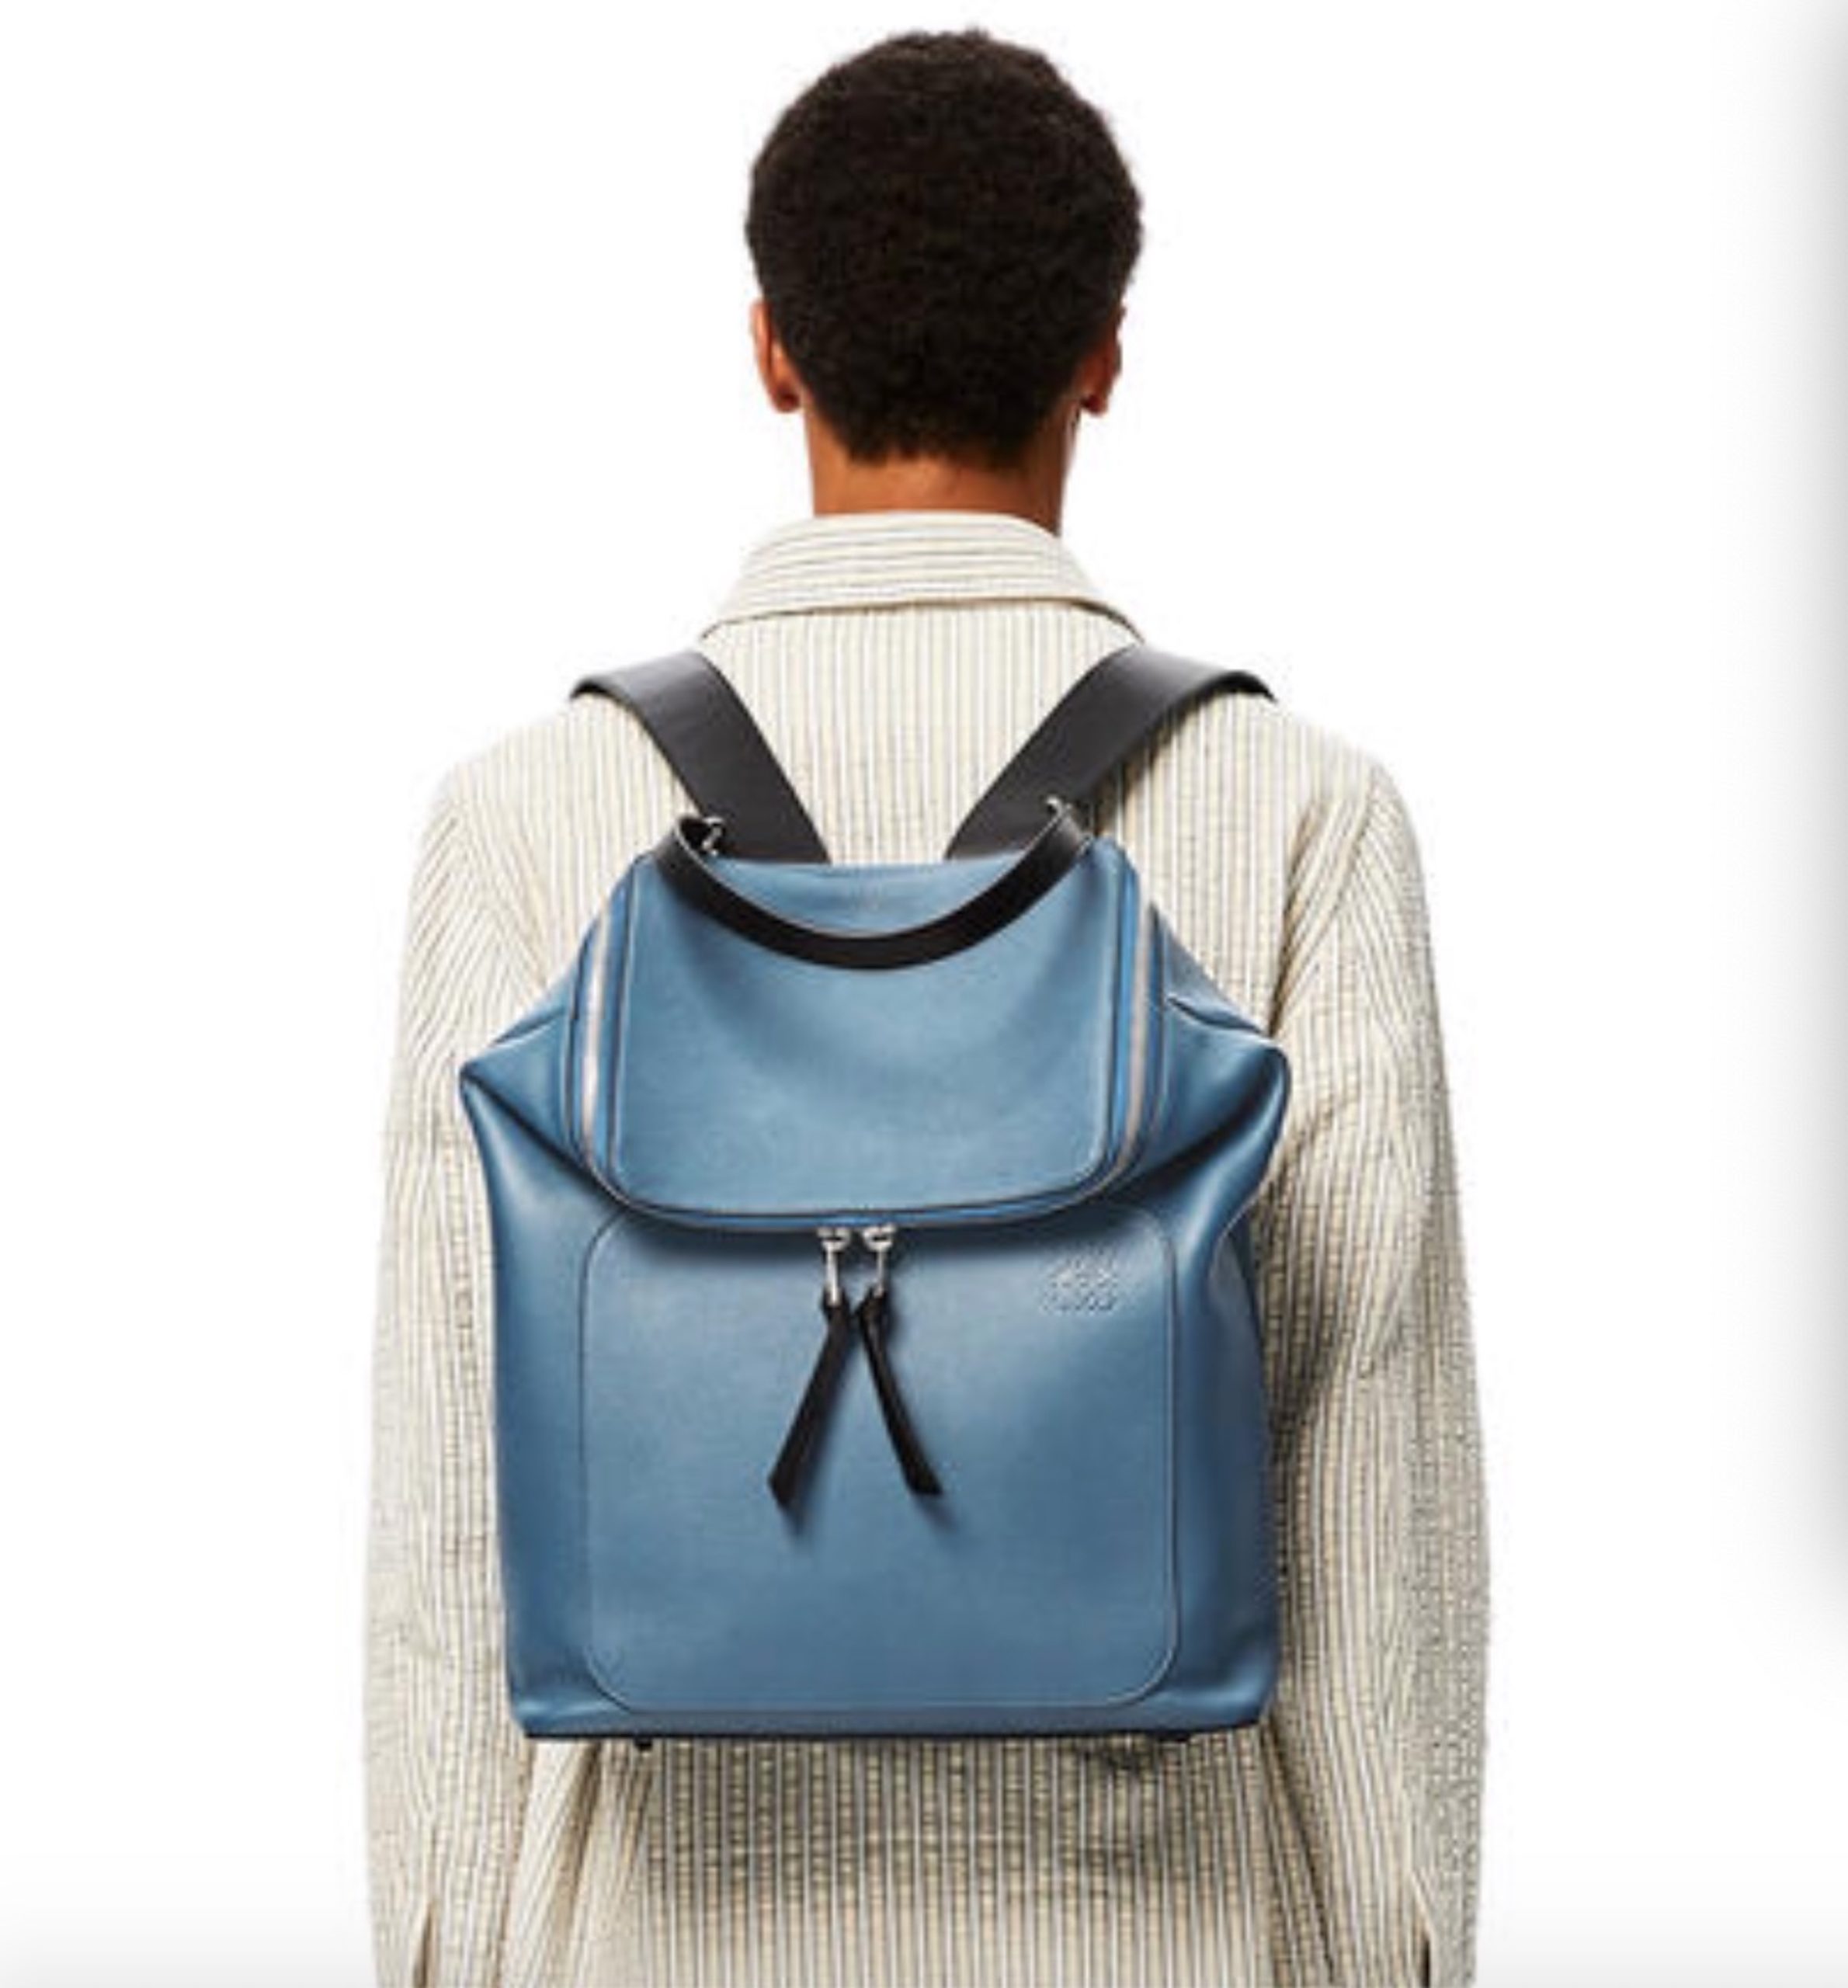 These Back-to-School Pieces To Prepare You For A New School Year | V Man